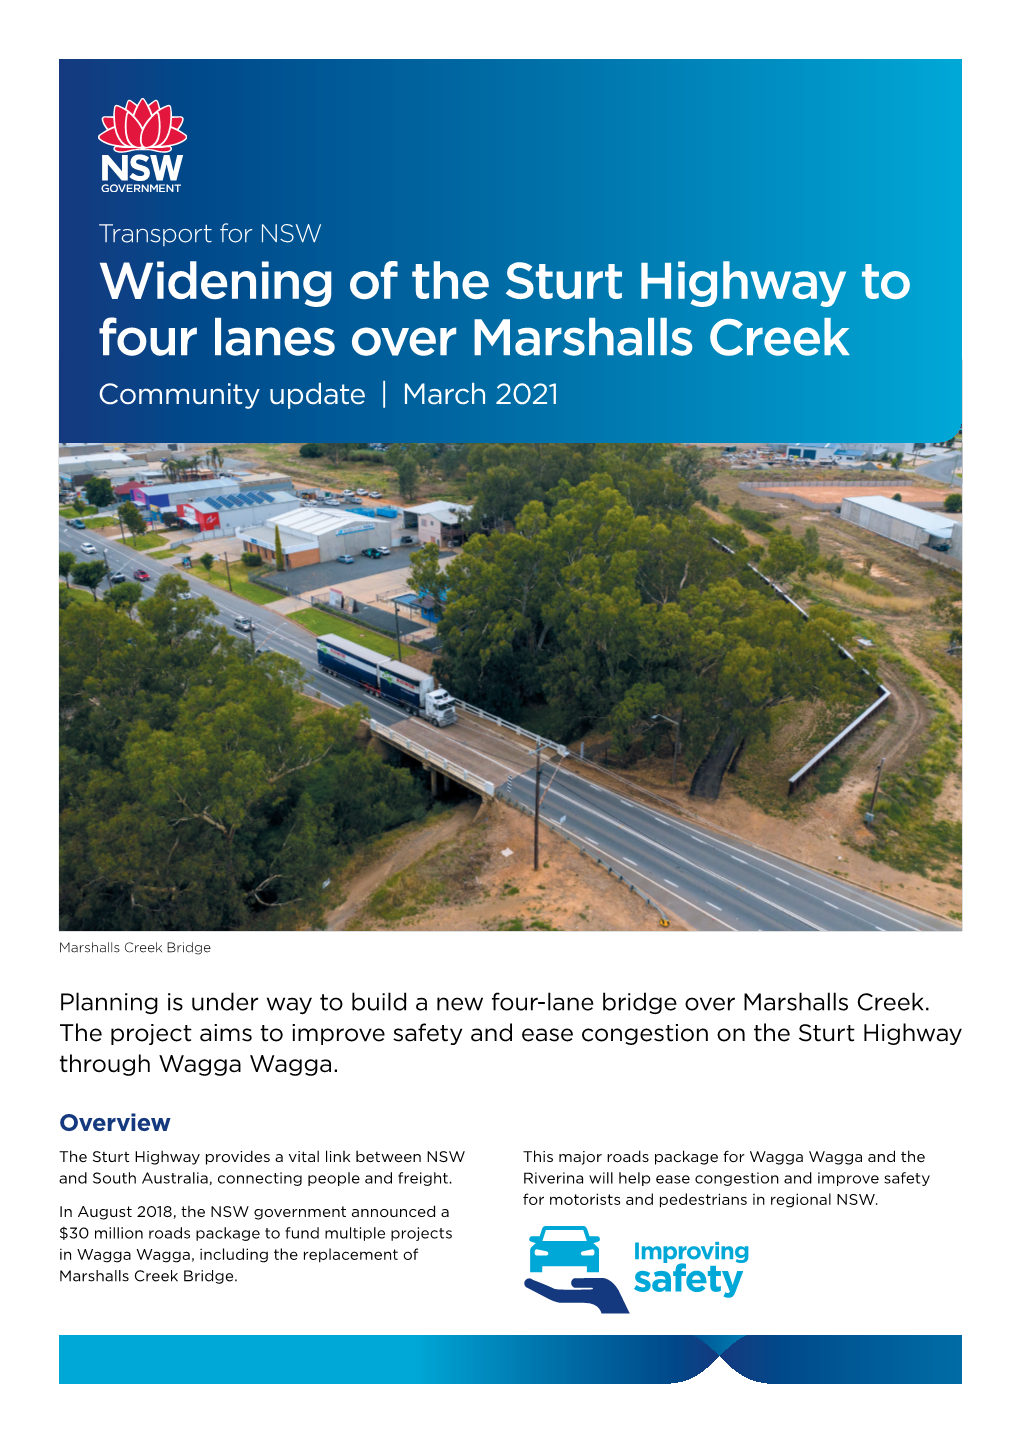 Widening of the Sturt Highway to Four Lanes Over Marshalls Creek Community Update | March 2021